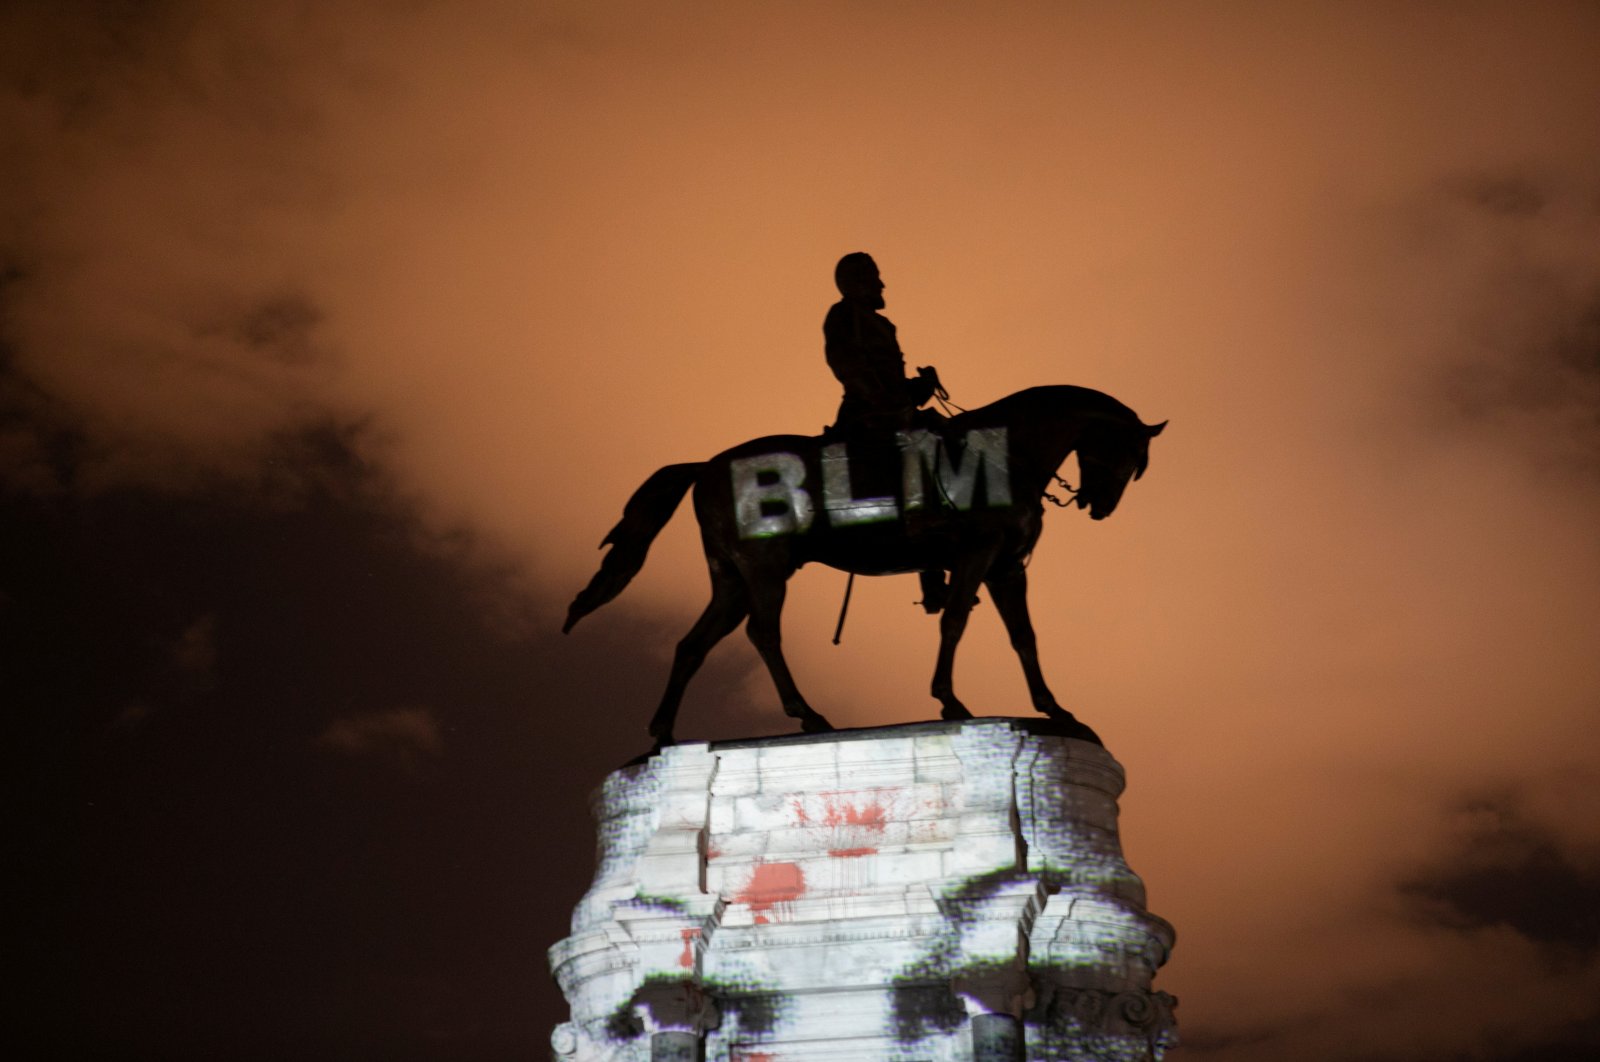 Artist Dustin Klein projects a Black Lives Matter image onto the statue of Confederate Gen. Robert E. Lee in Richmond, Virginia, U.S., June 18, 2020. (Reuters Photo)